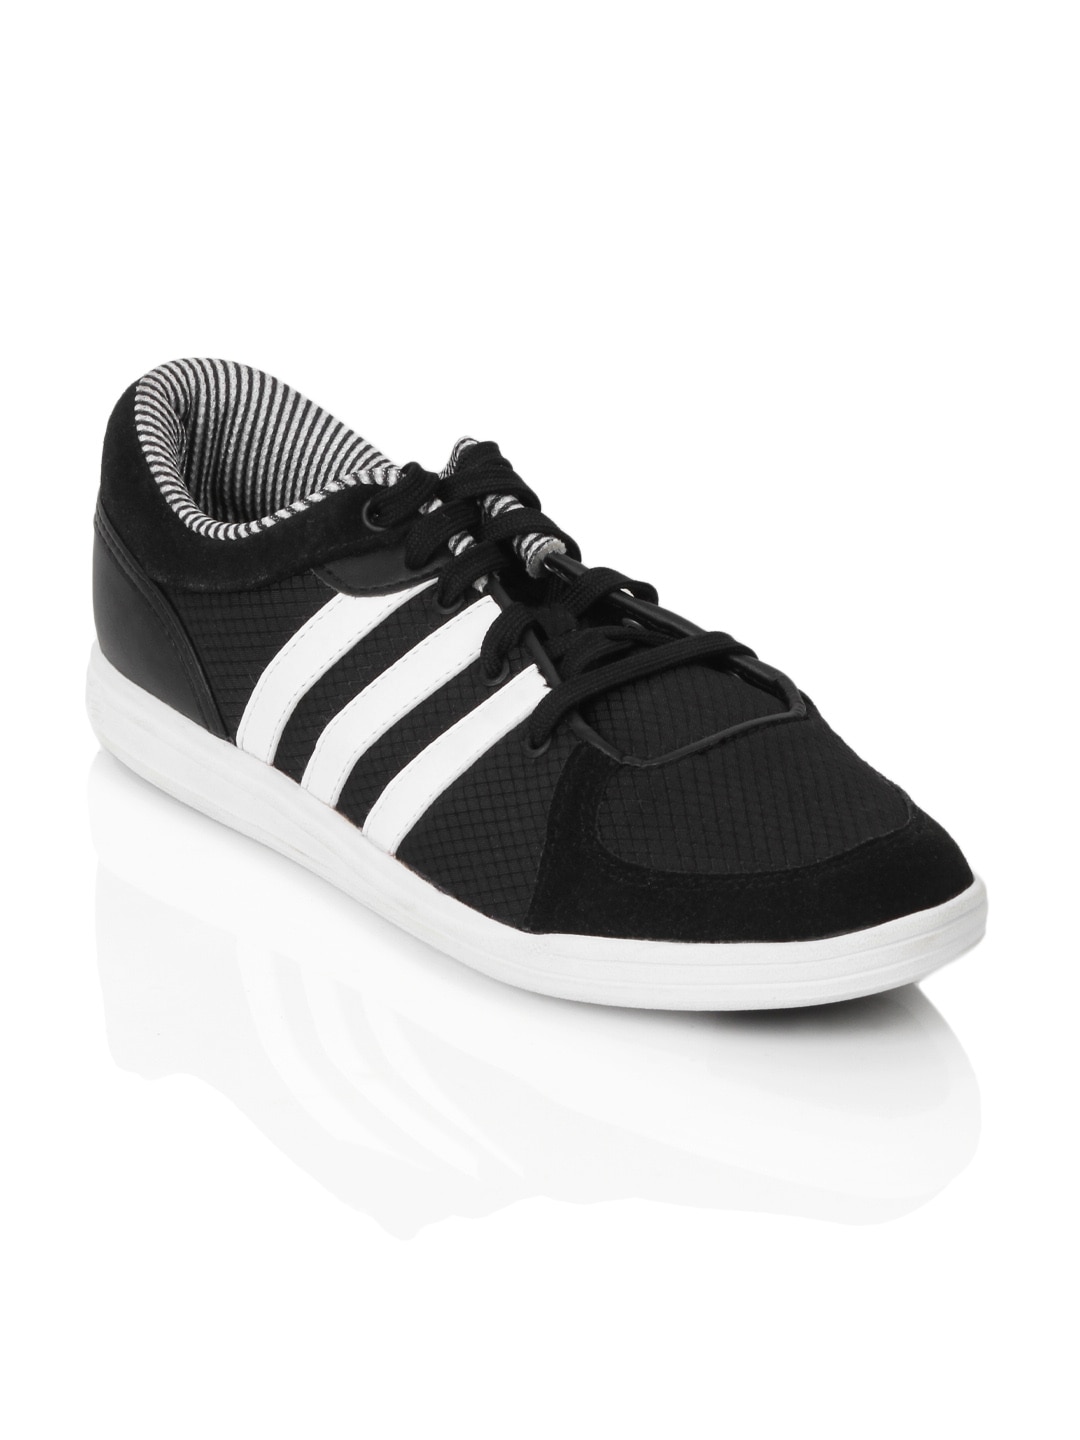 ADIDAS Neo Unisex Court Sequence Black Shoes